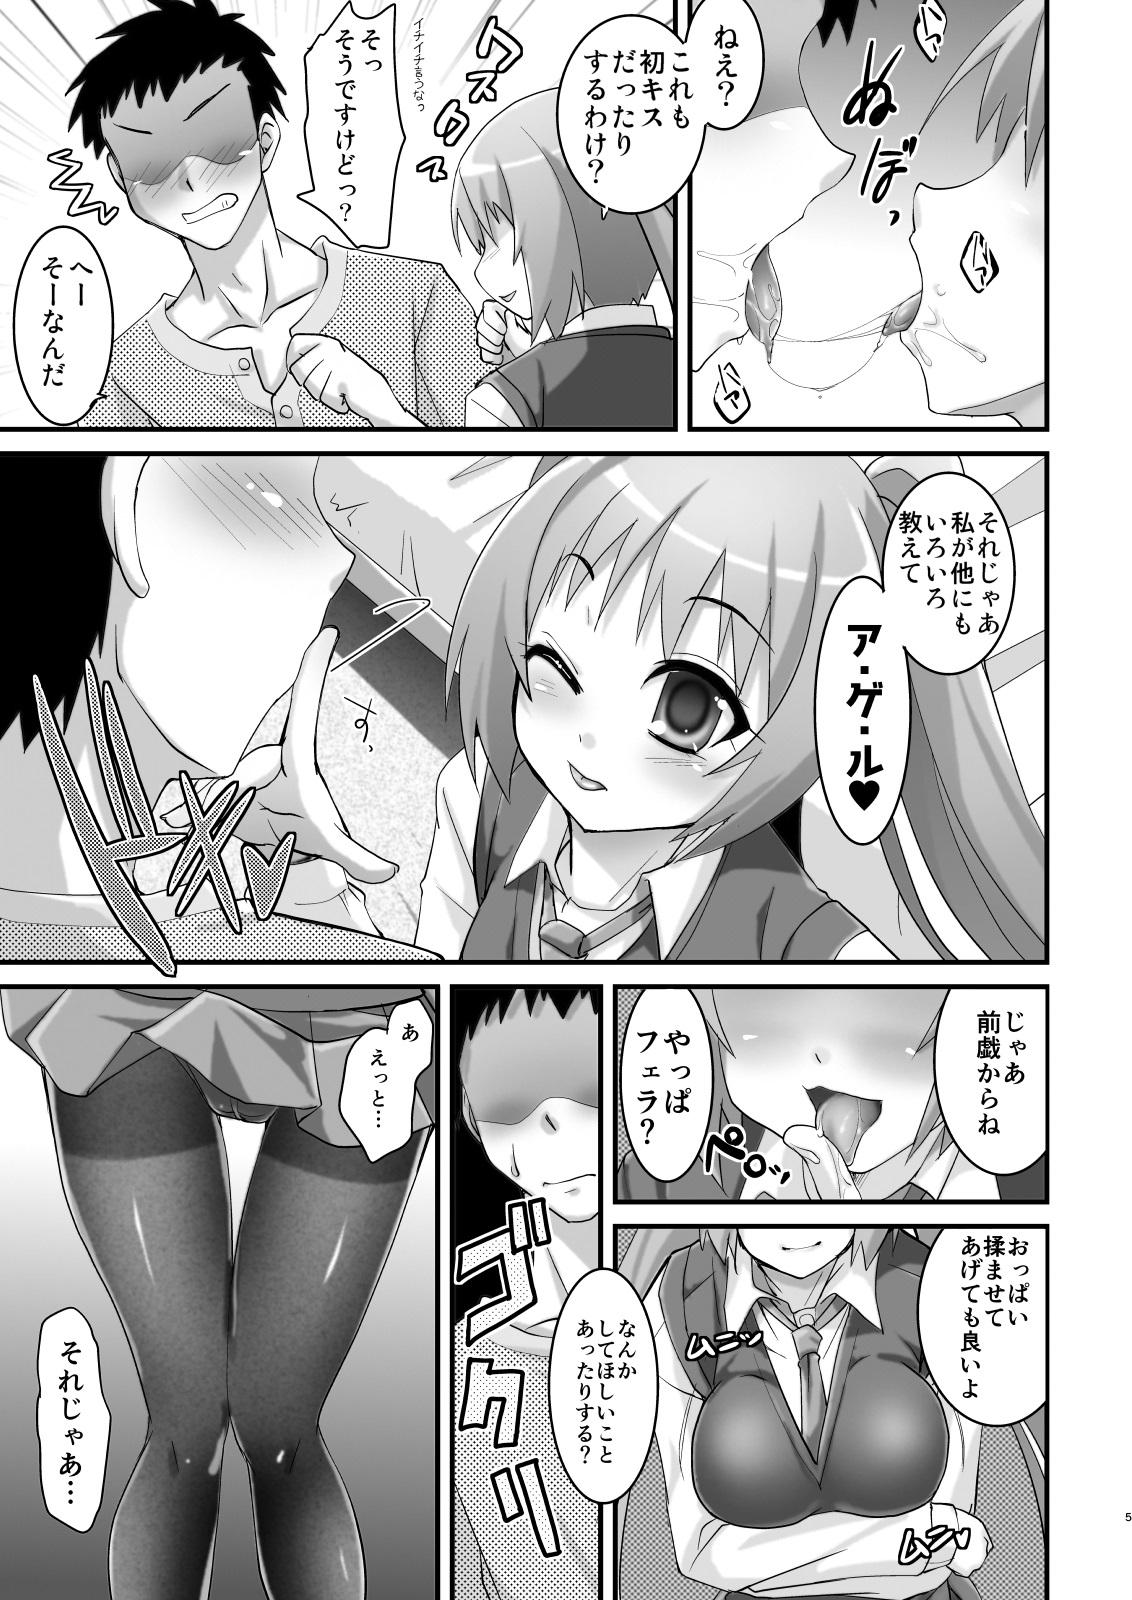 Small Boobs Tsundere Tights to Twintails - Original Relax - Page 5